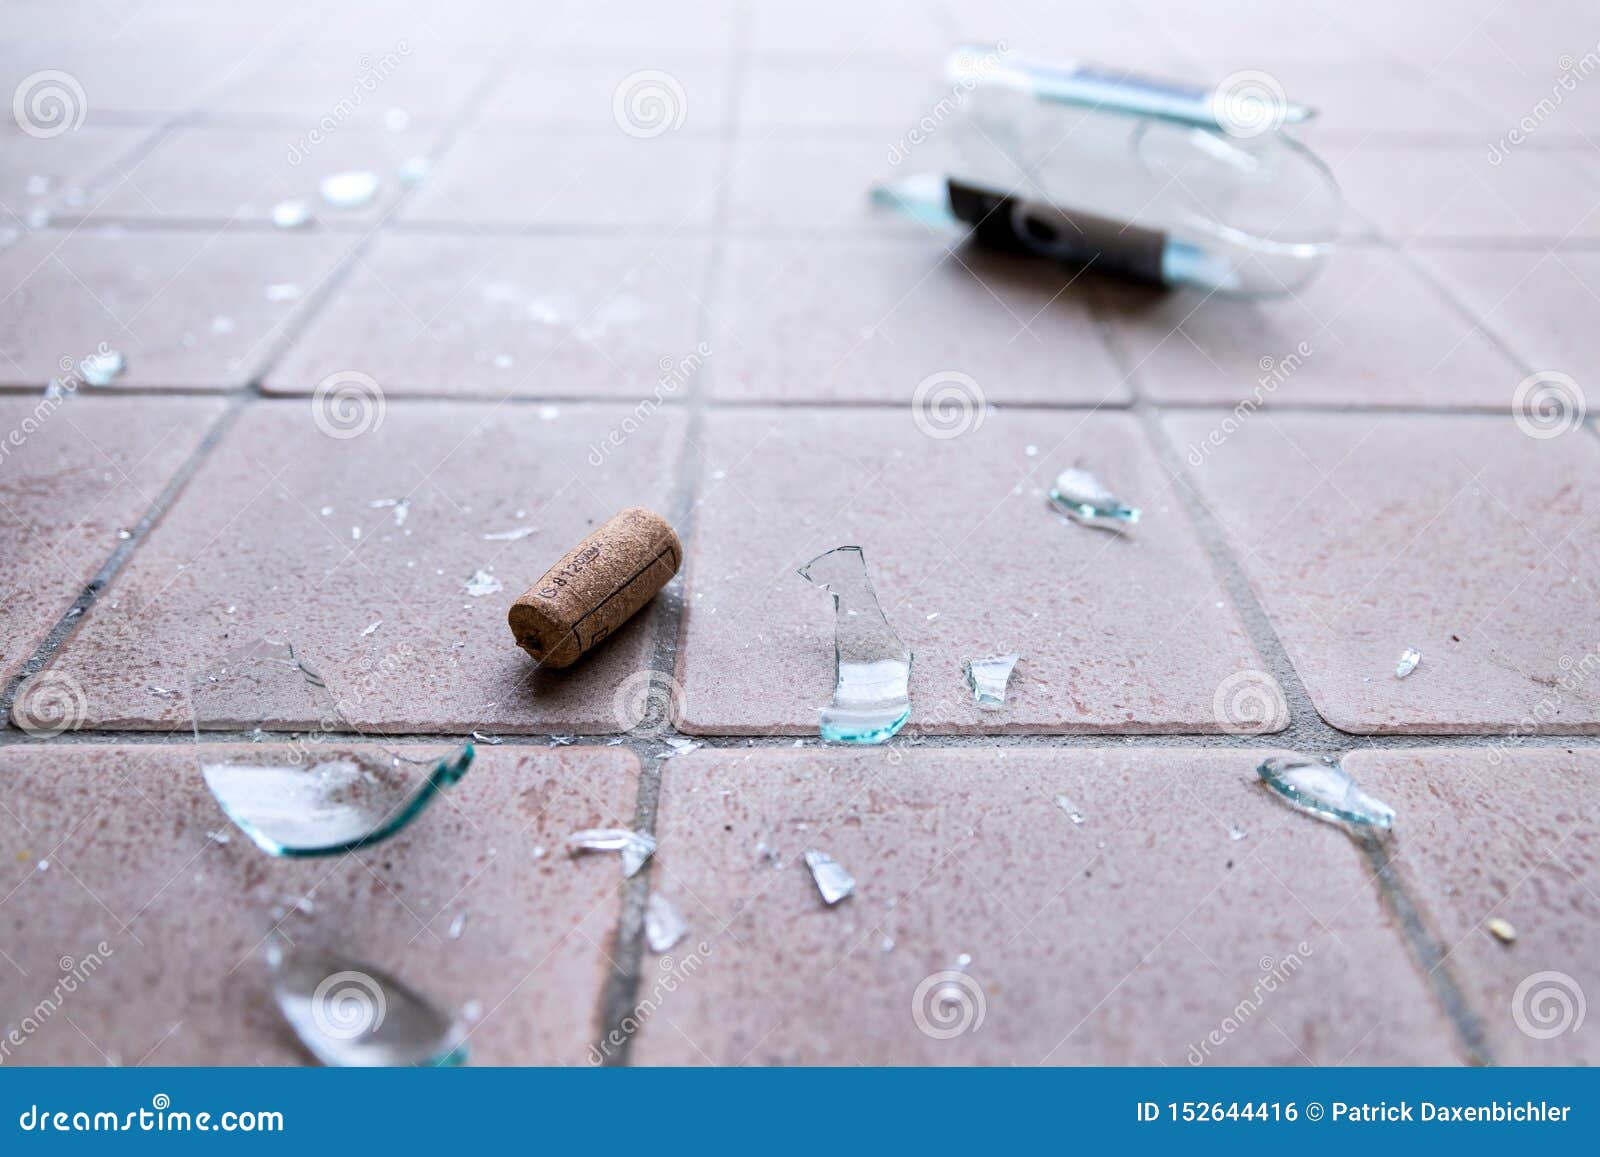 broken glass on the floor, alcohol abuse